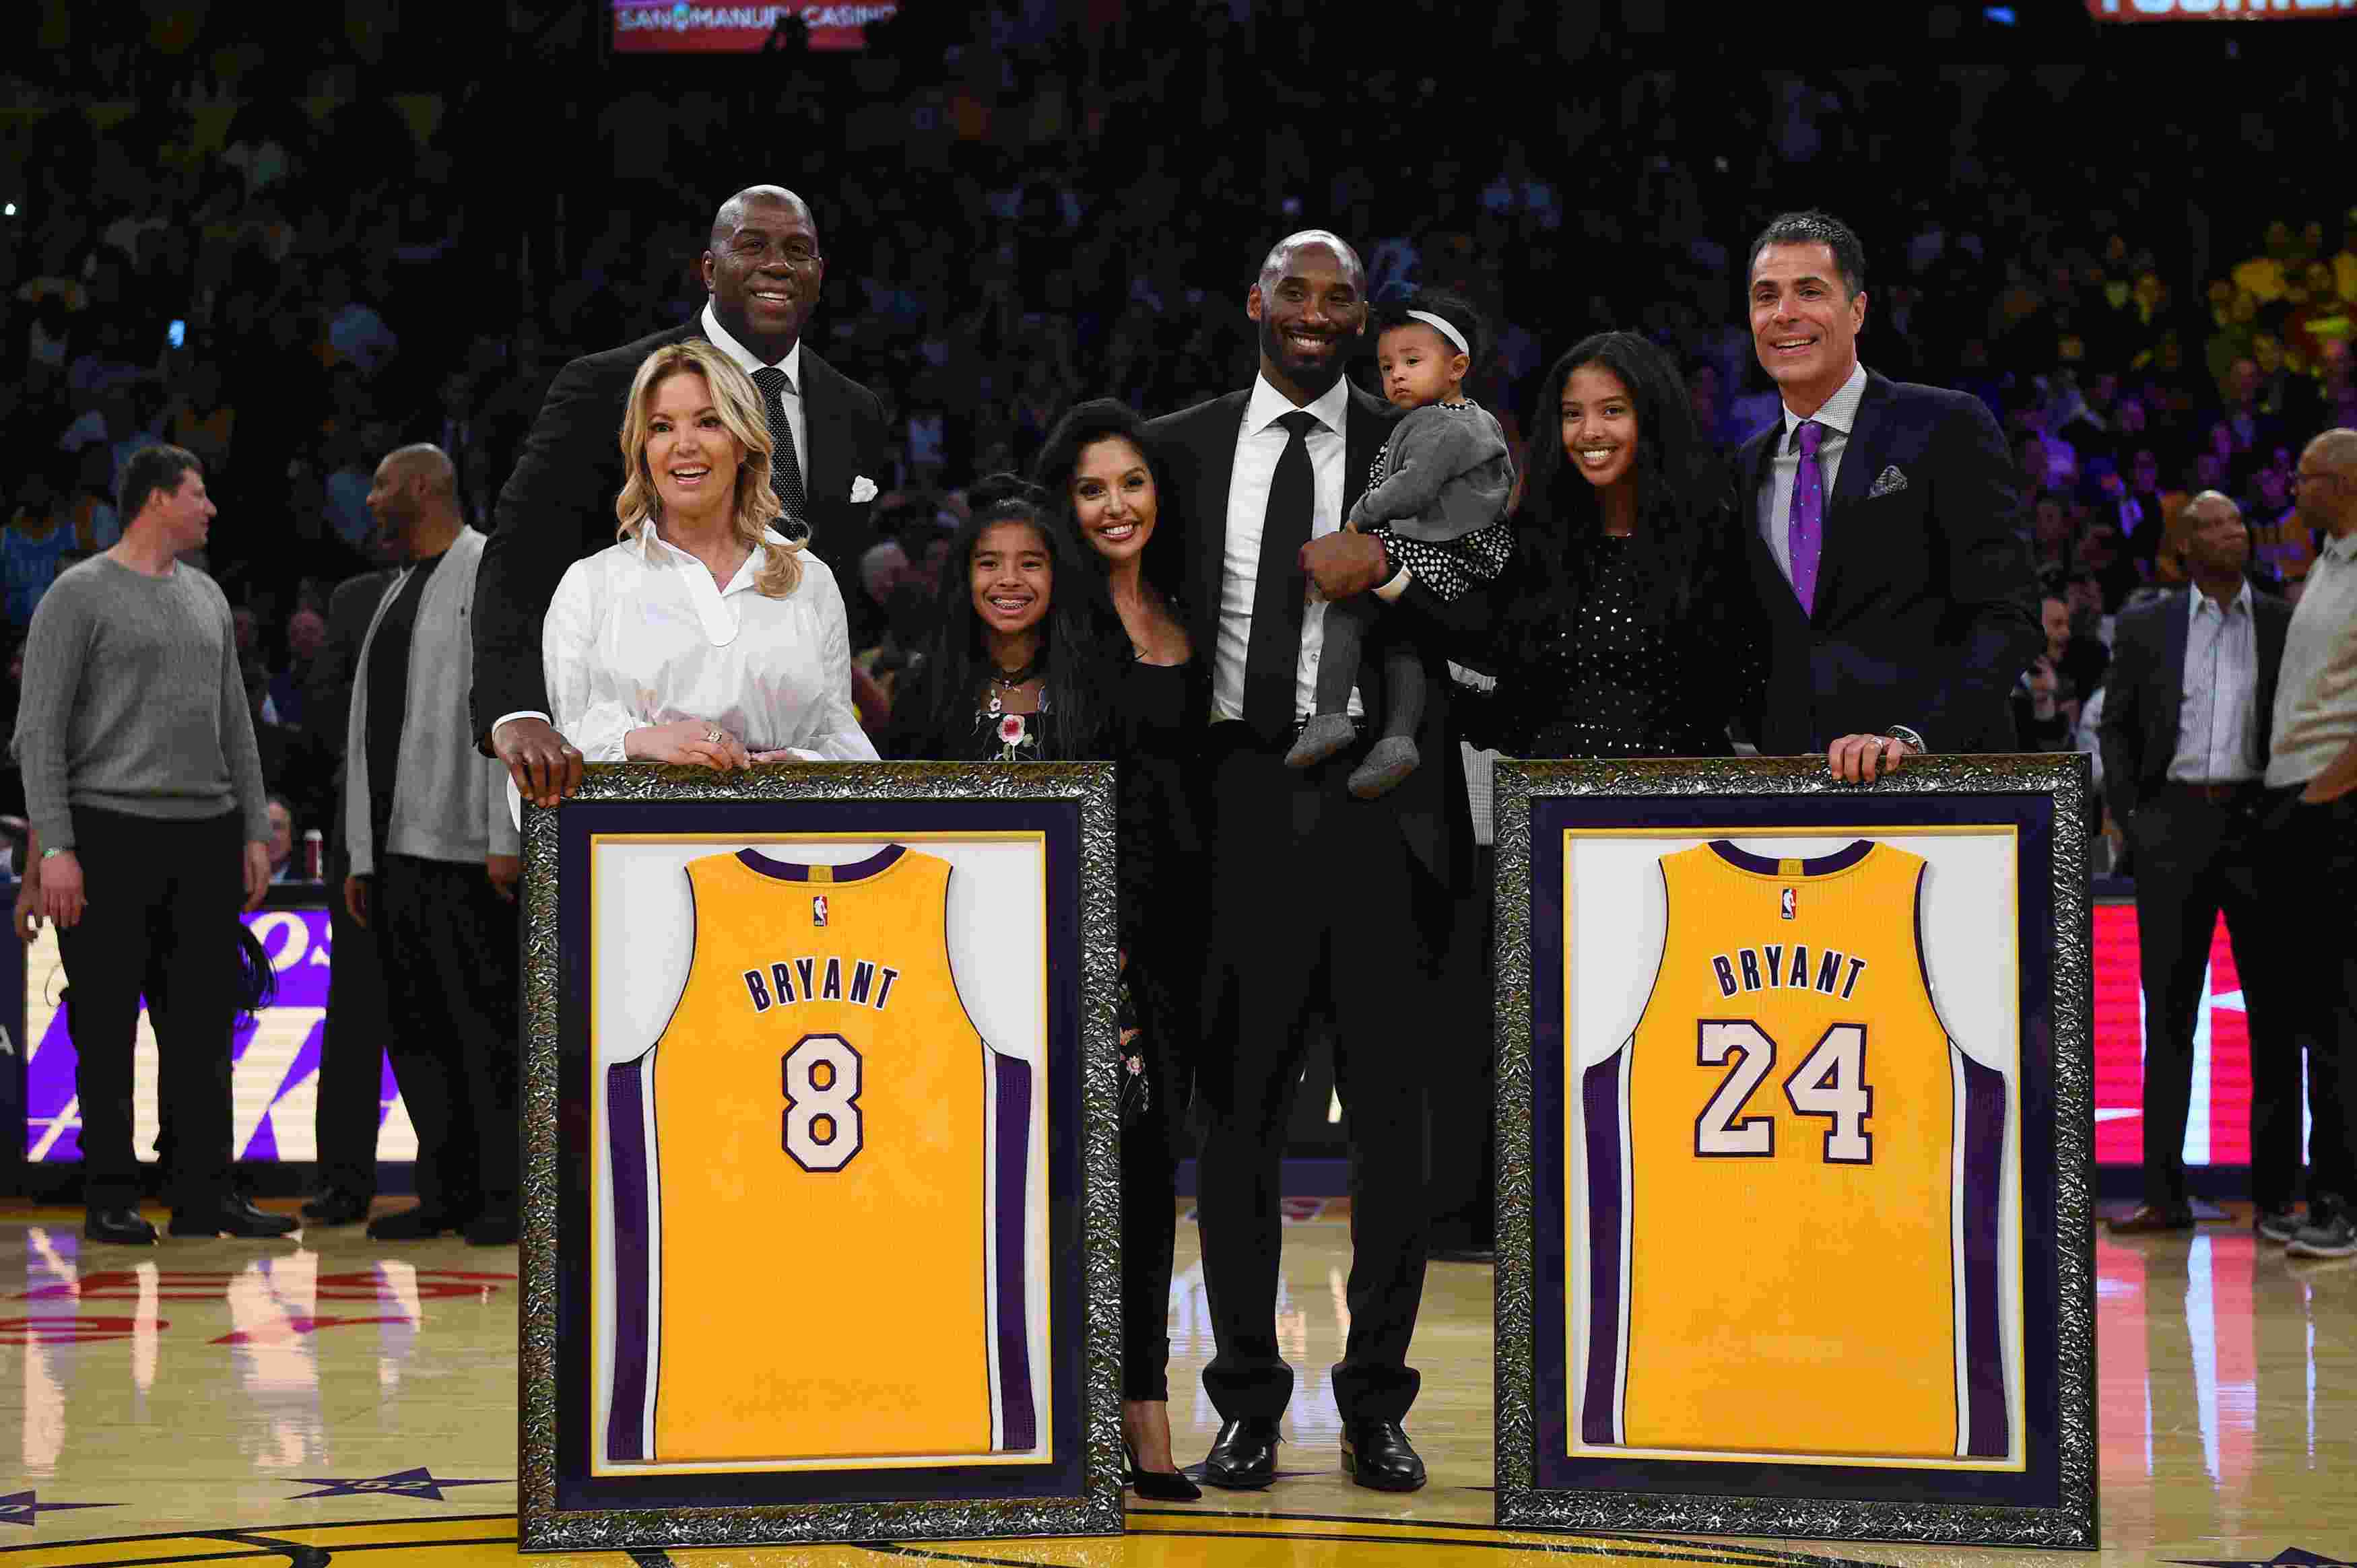 Remembering Kobe Bryan and His Legacy on the First Anniversary of his Death